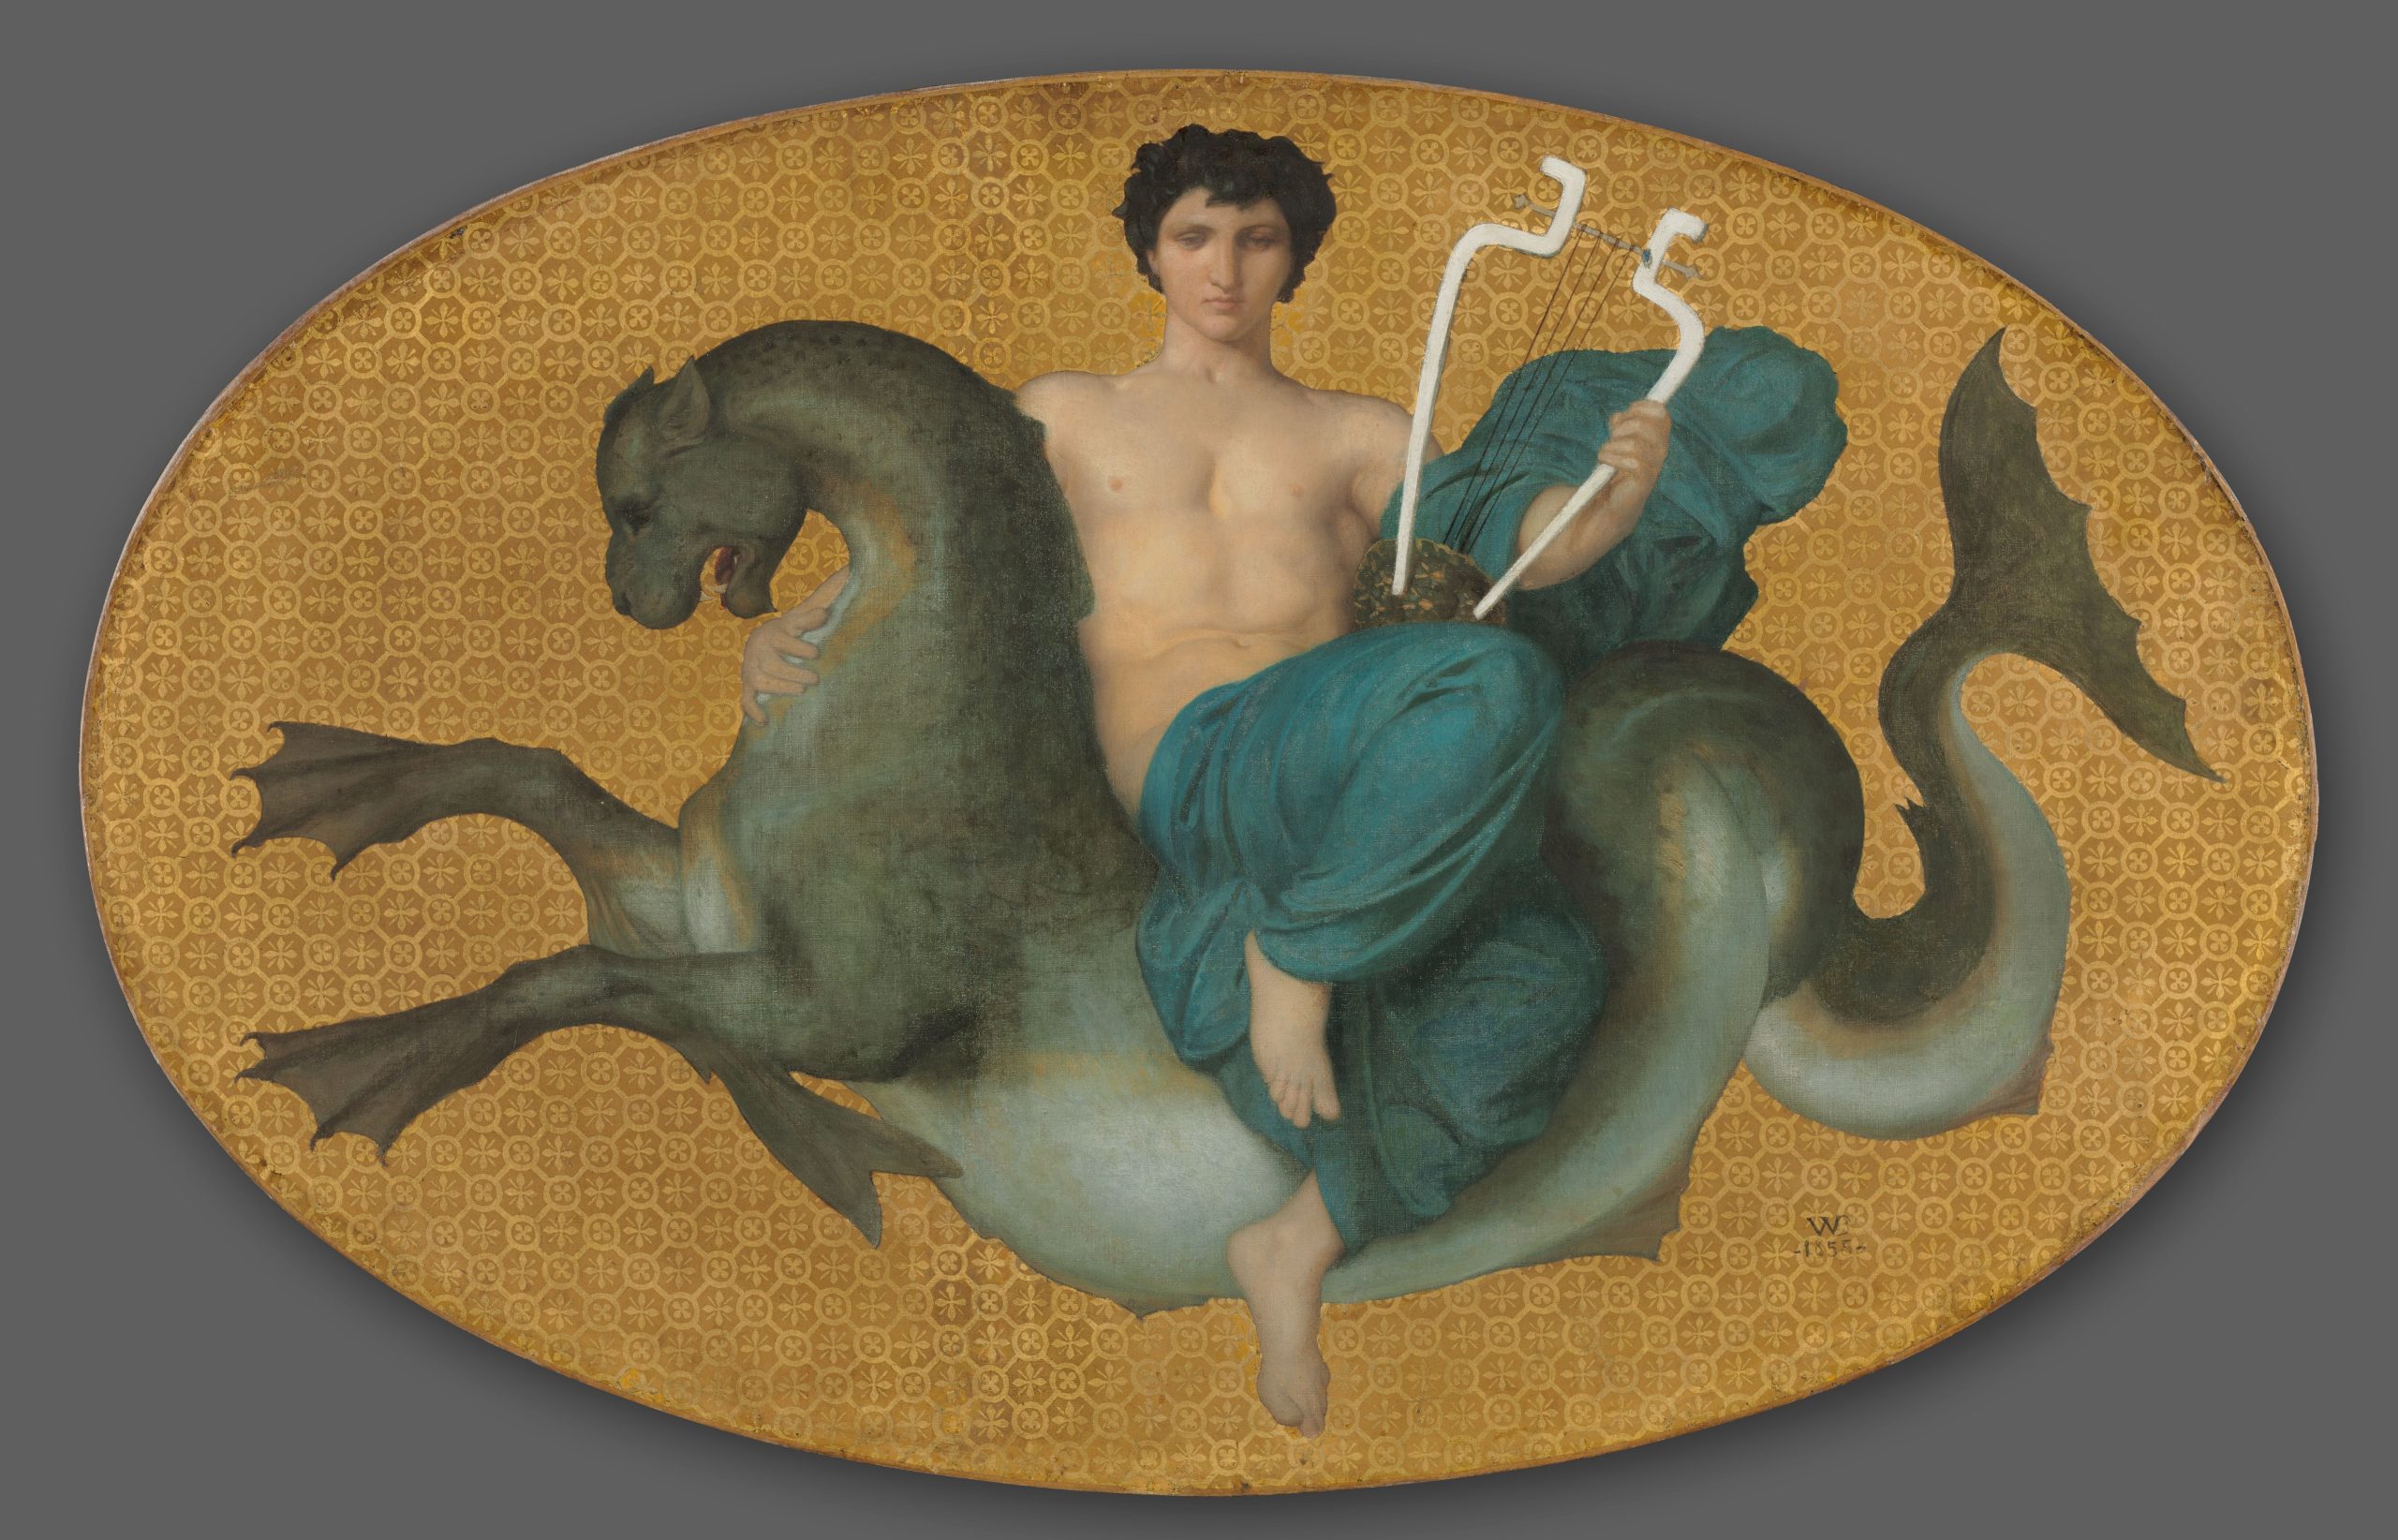 A bare chested man wrapped in cloth holds an instrument sits on a seahorse.